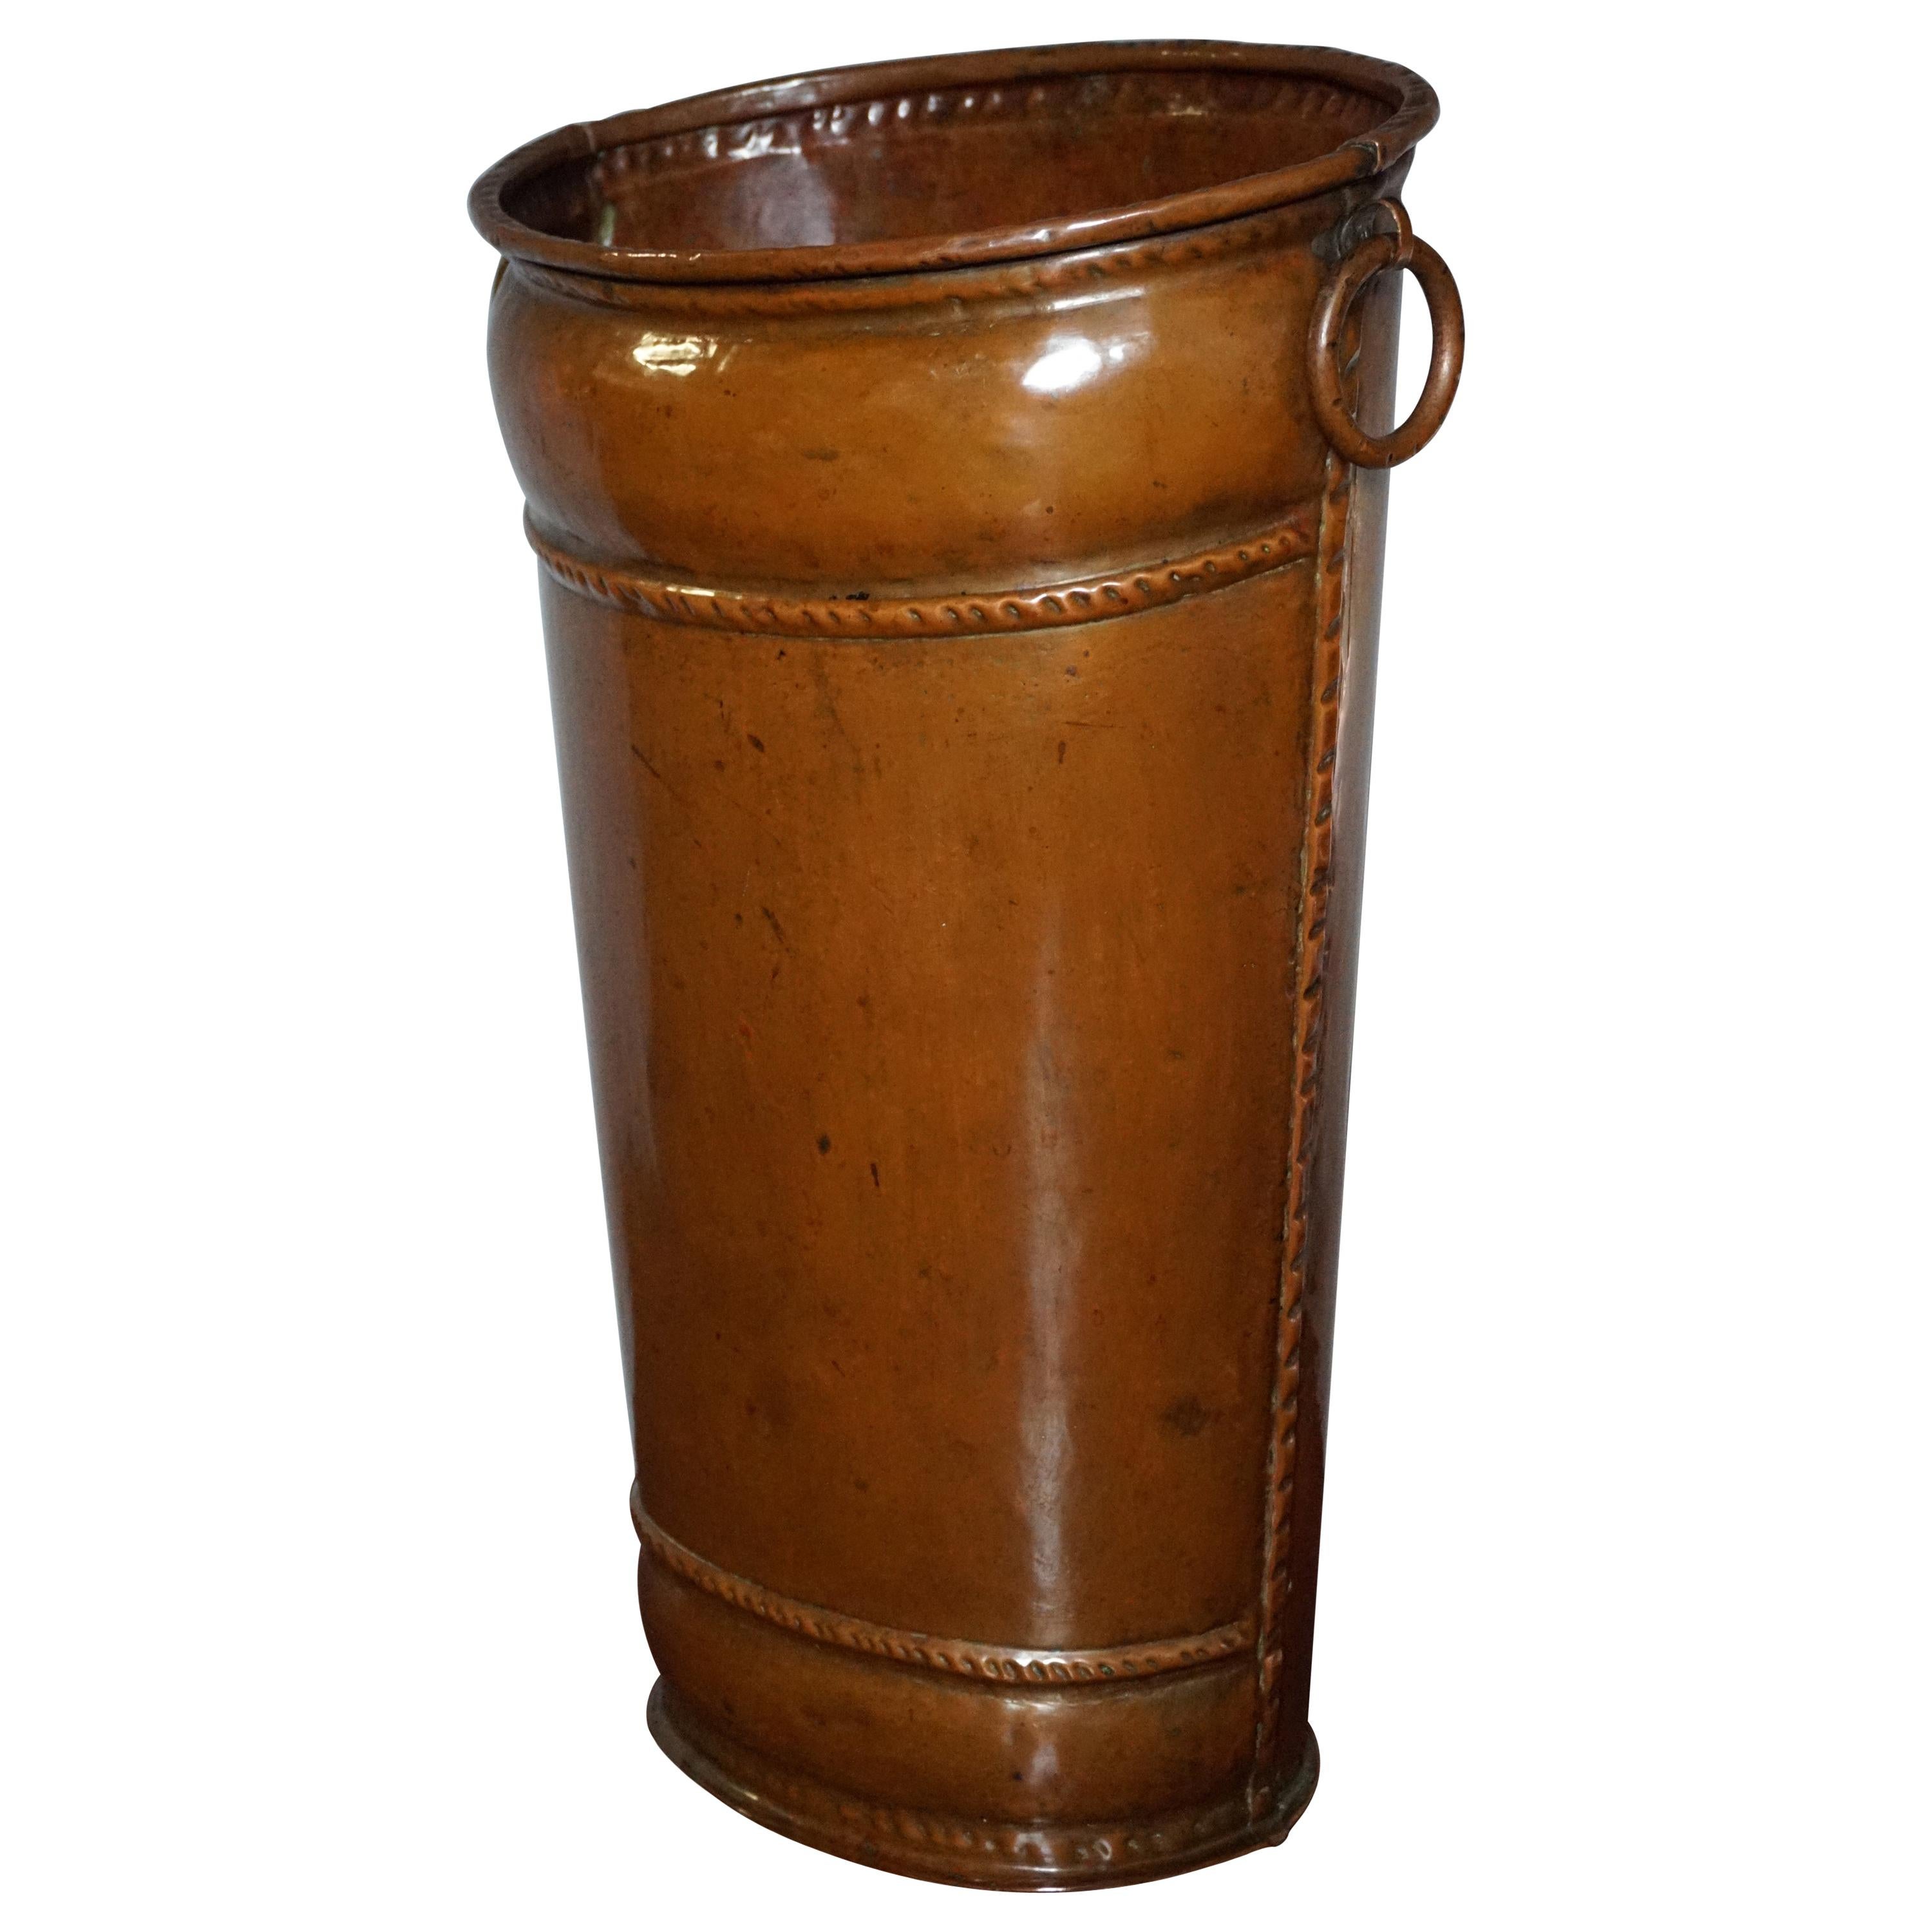 Late 1800s Handcrafted Copper Umbrella Stand Resembling Ancient Leather Bucket